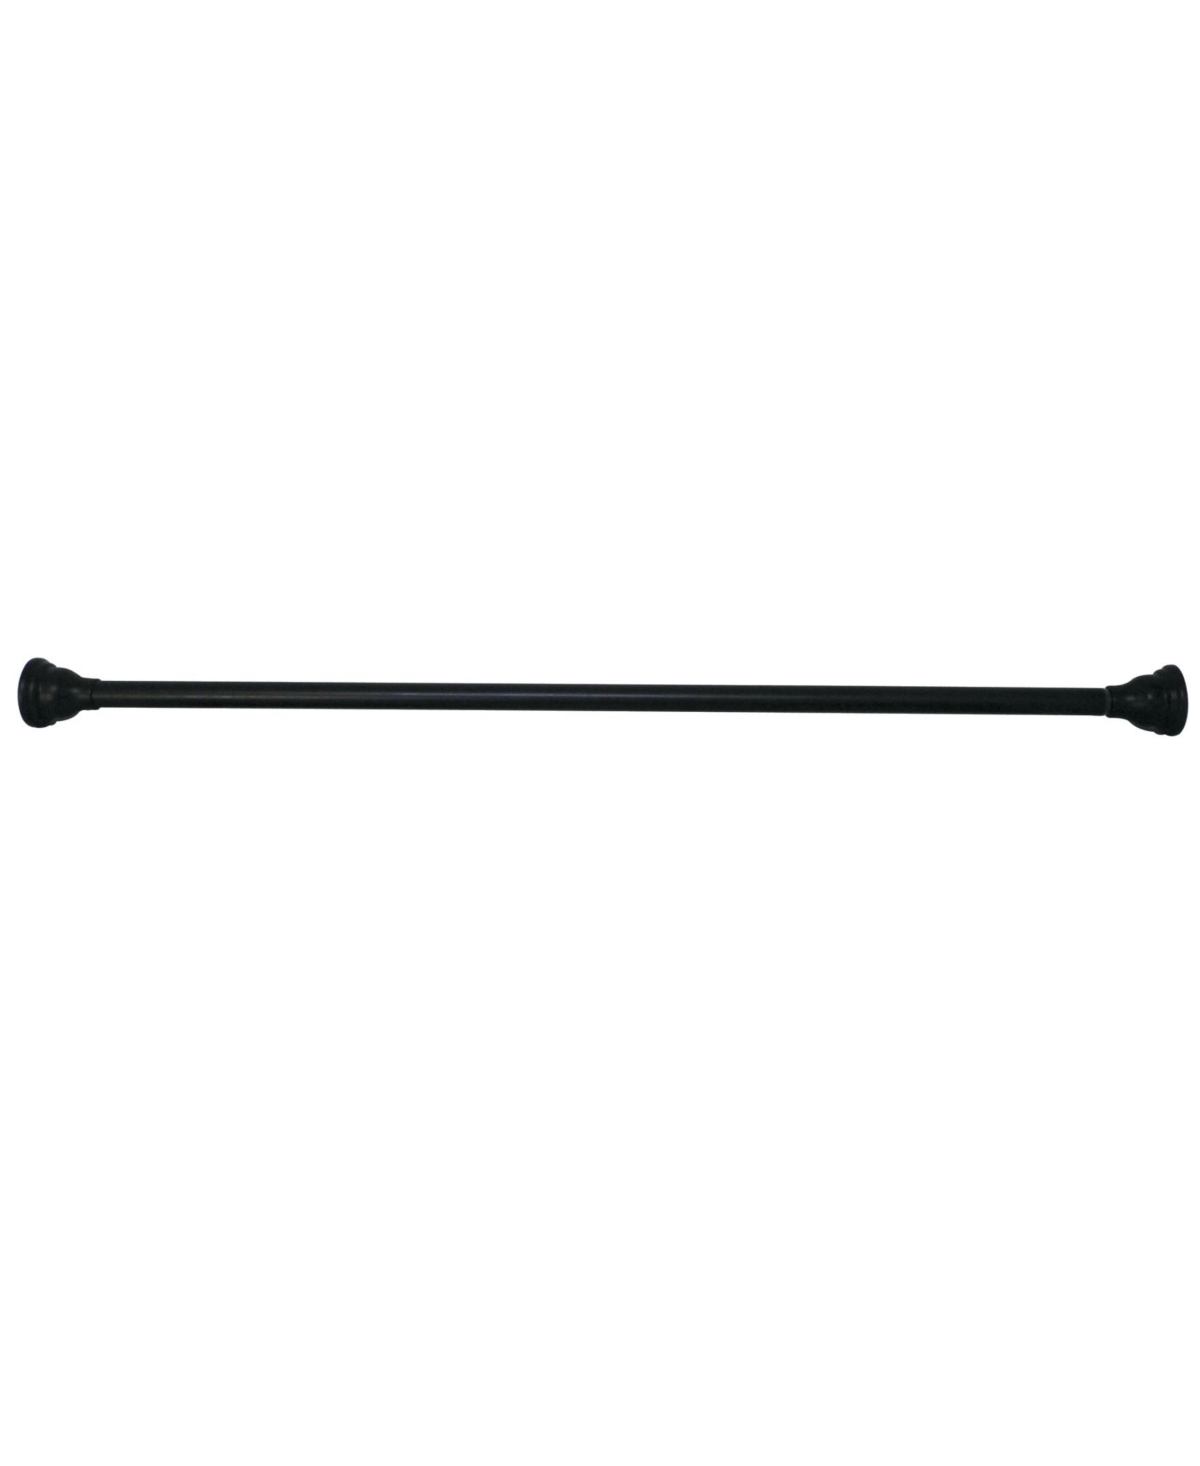 Kingston Brass 72-inch Tension Shower Rod with Decorative Flange in Oil Rubbed Bronze Bedding